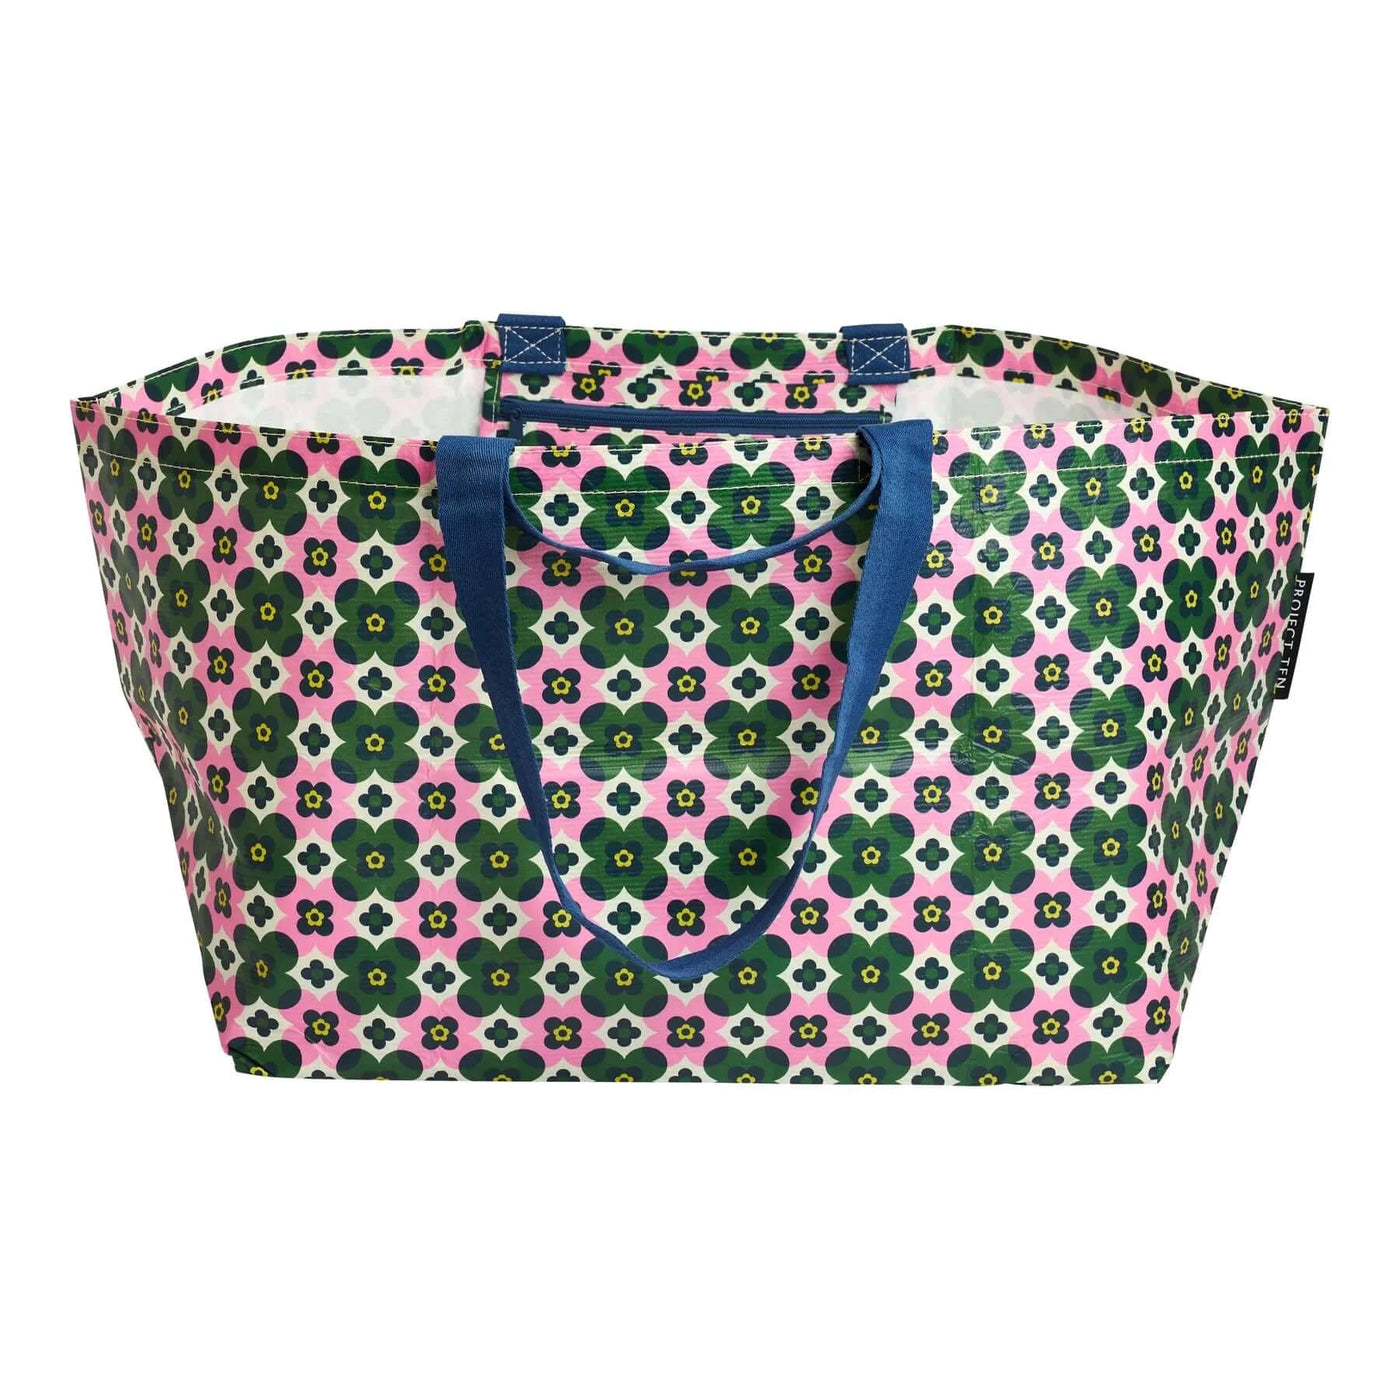 Oversize Tote - Block Floral